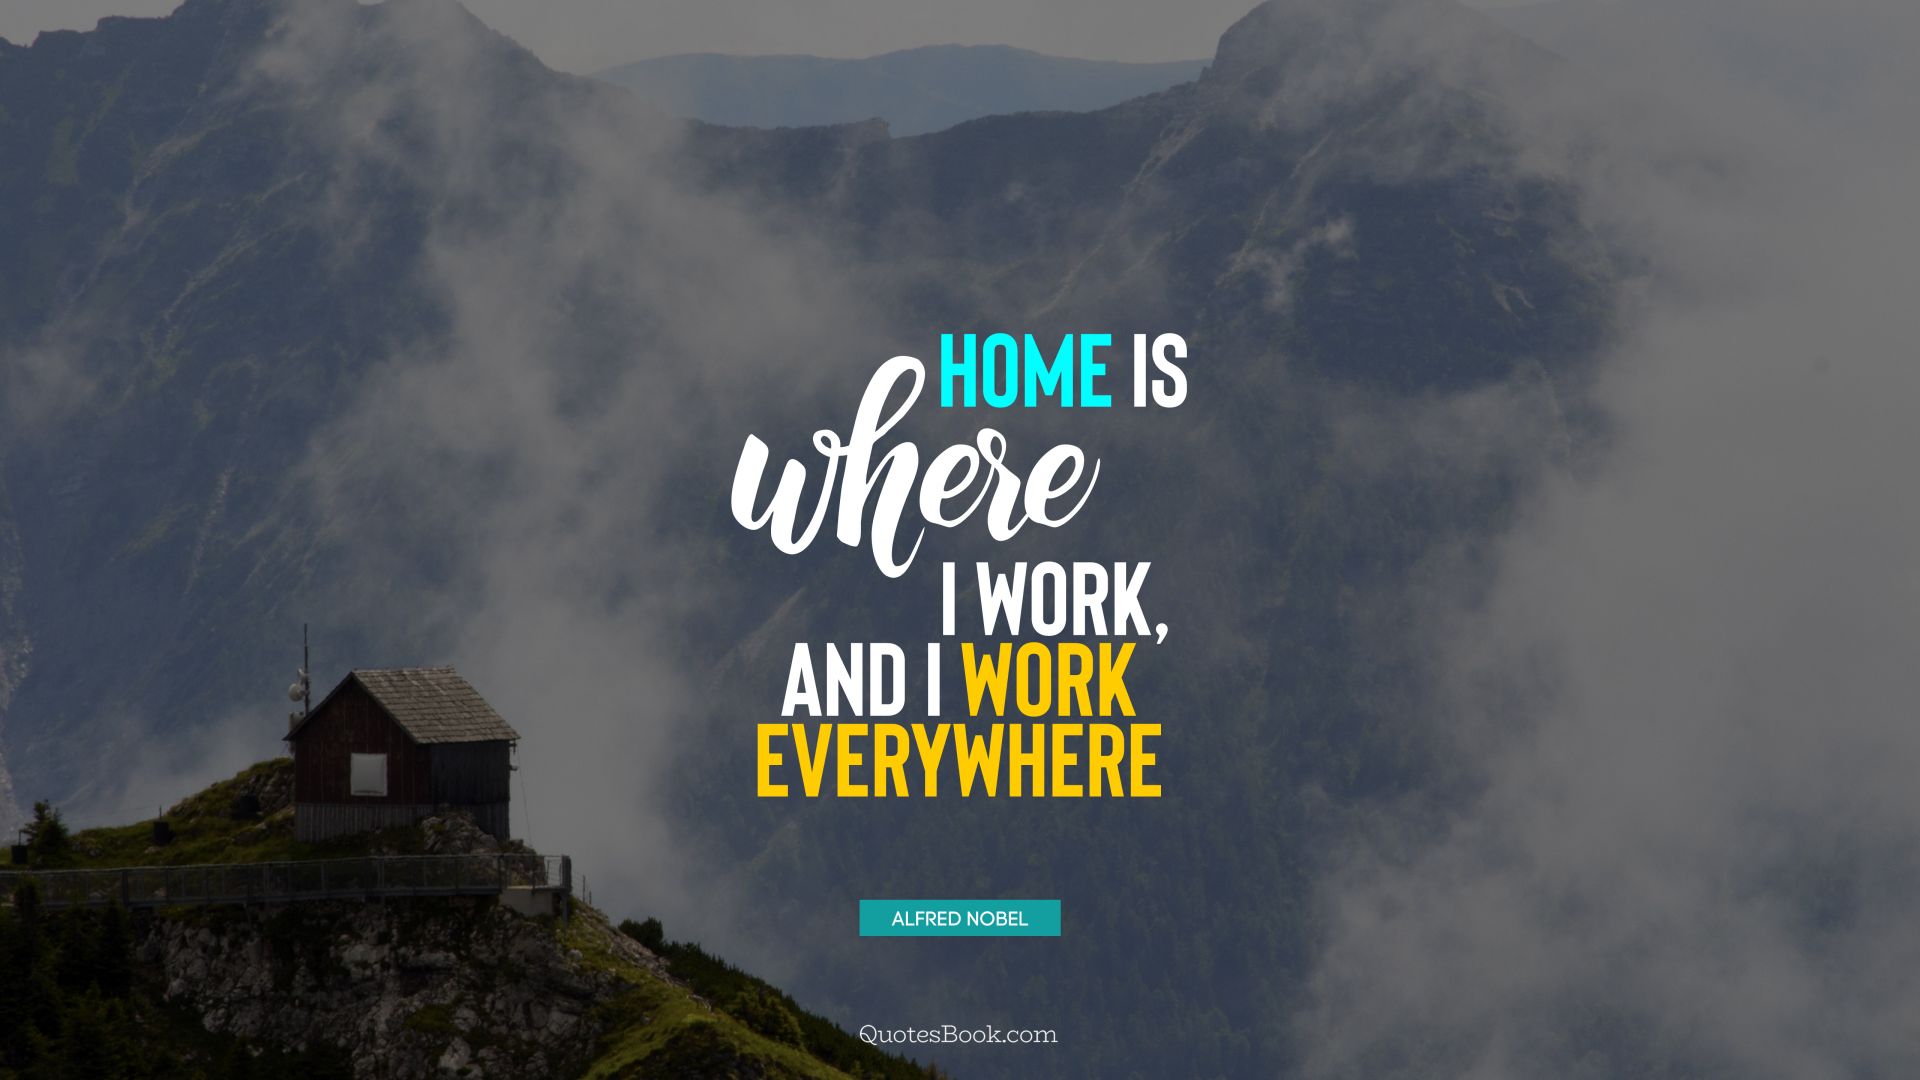 Home is where I work, and I work everywhere. - Quote by Alfred Nobel